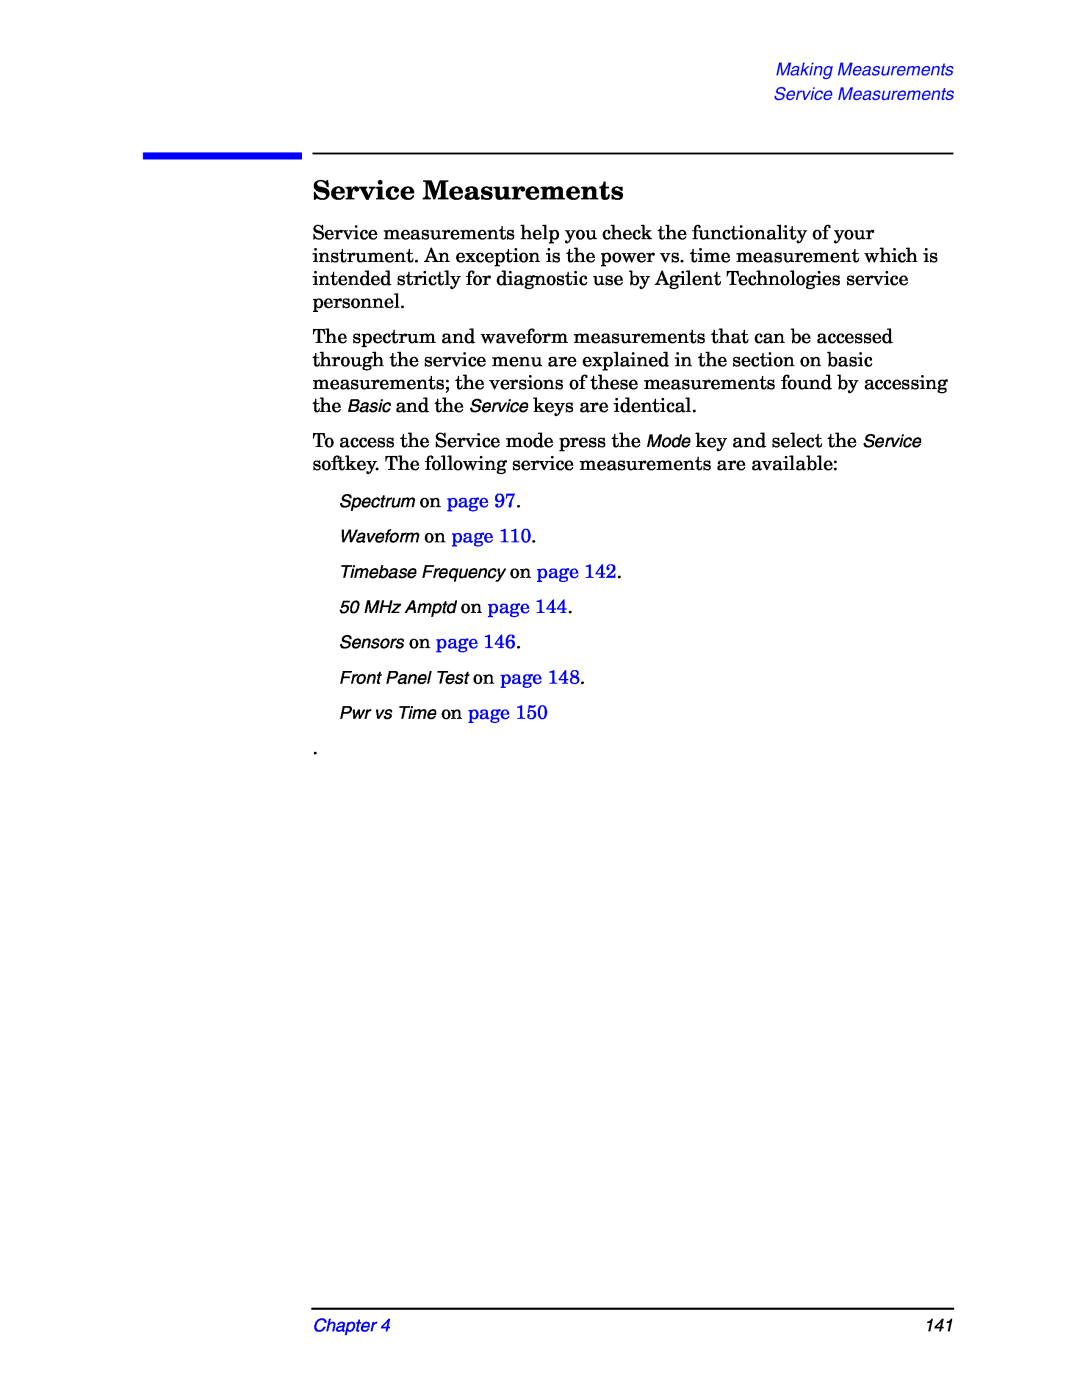 Agilent Technologies E4406A manual Service Measurements, Front Panel Test on page Pwr vs Time on page 